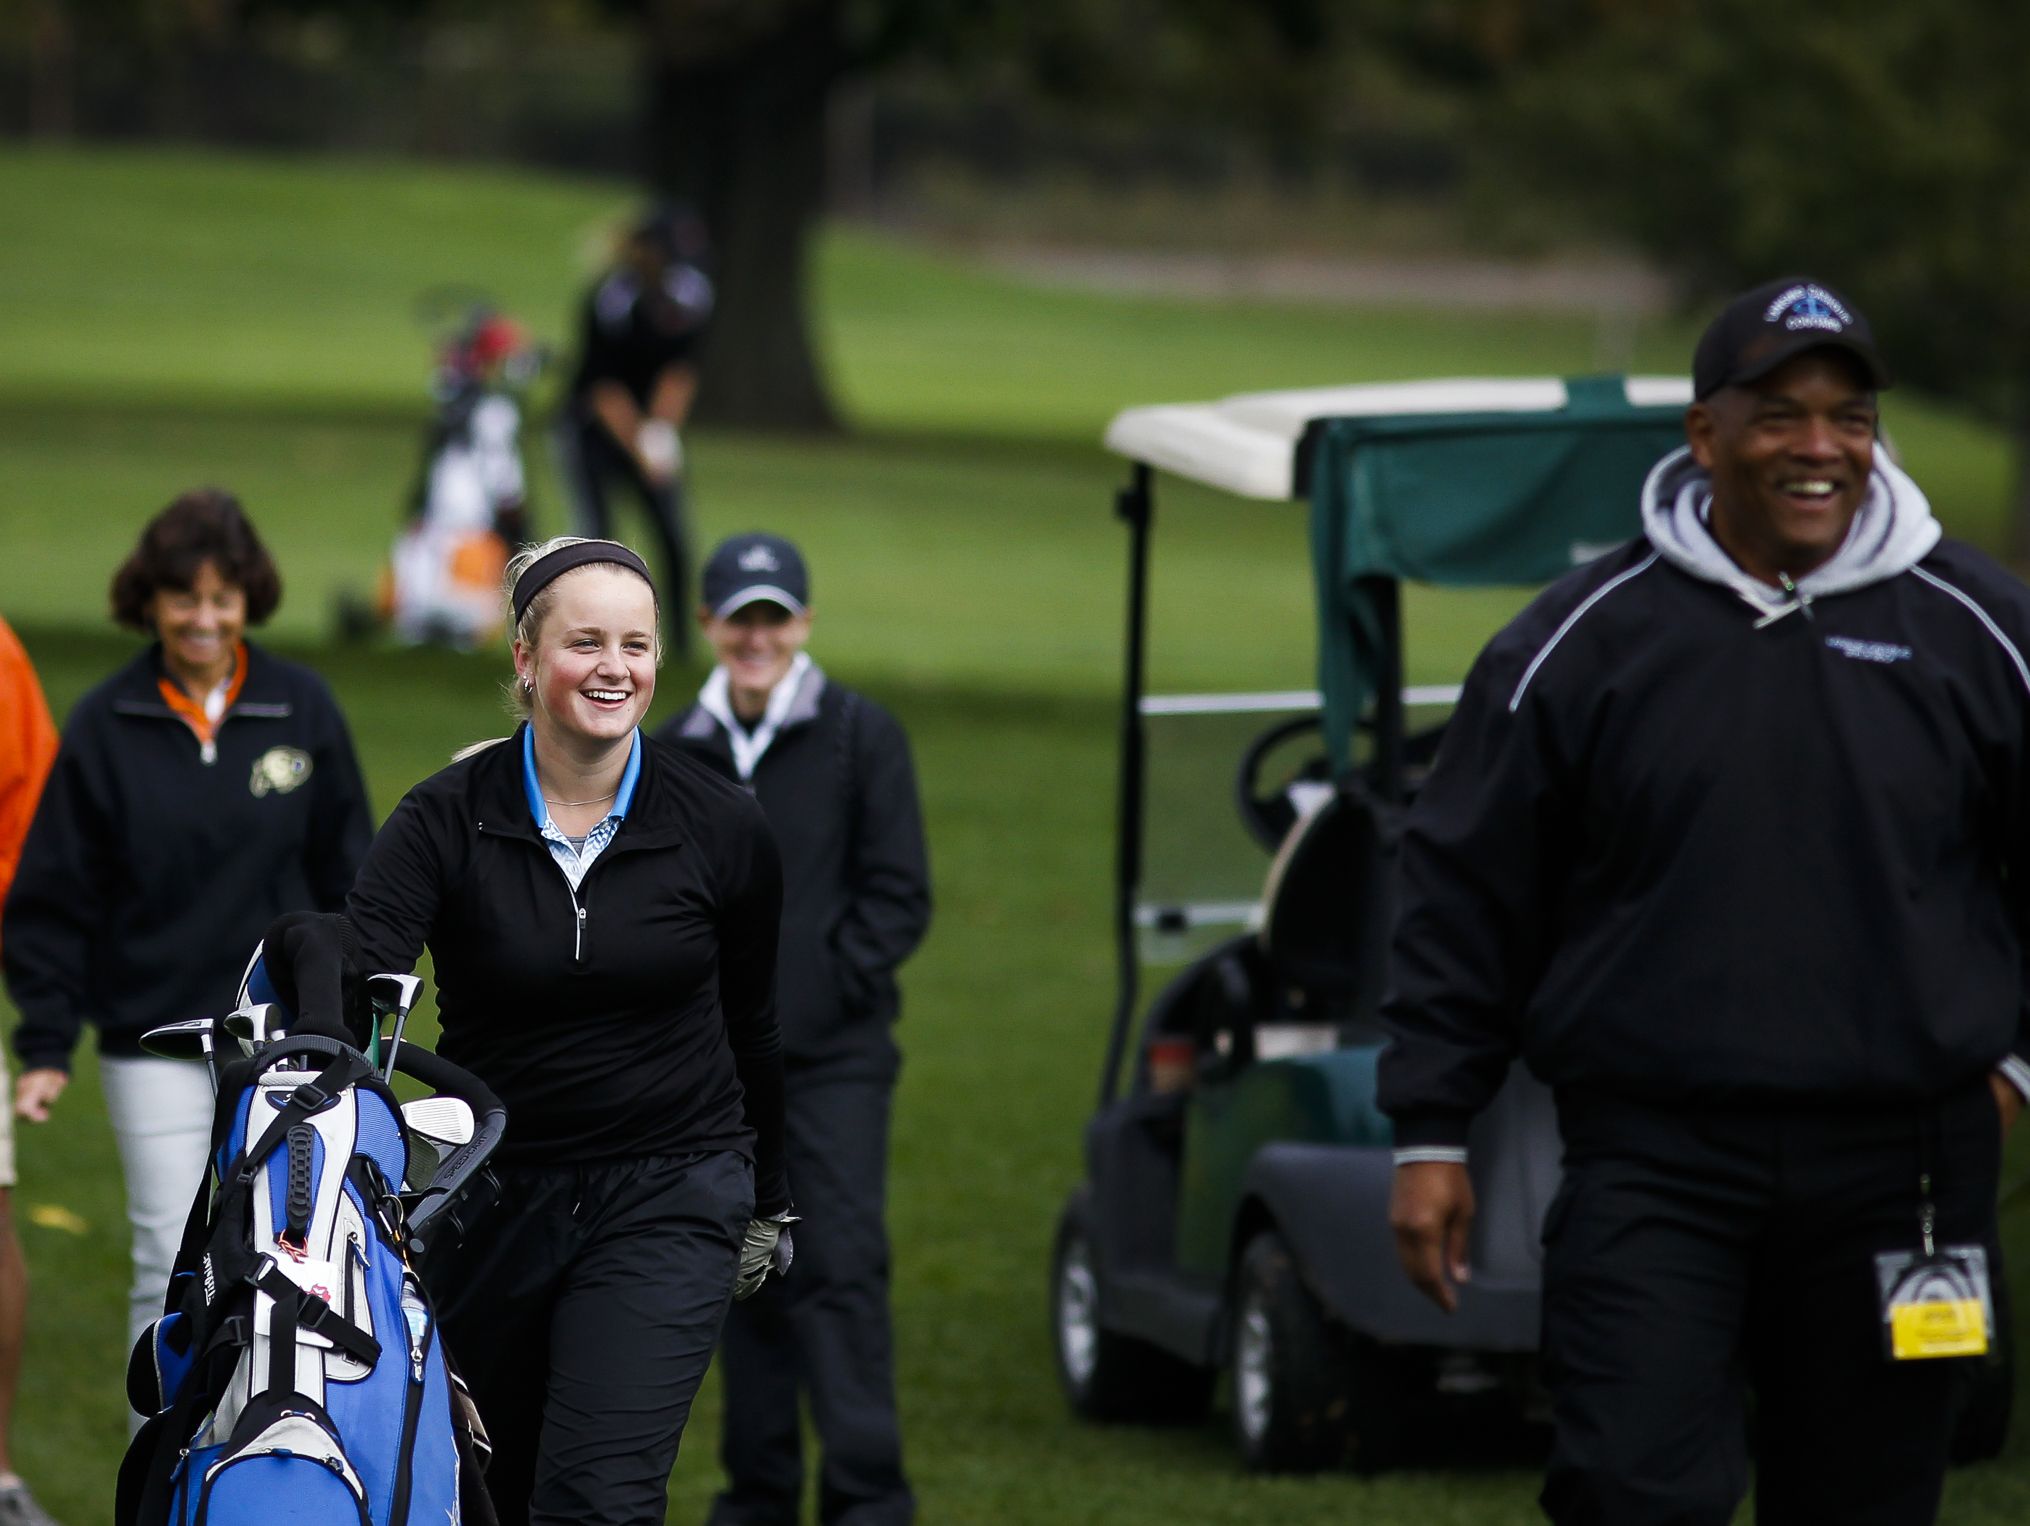 Lansing Catholic senior Abigail Meder and her coach Kim Johnson, right, smile after Meder eagled the fourth hole during the Div. 4 Girls Golf Finals October 15, 2016, at Forest Akers West at Michigan State University.